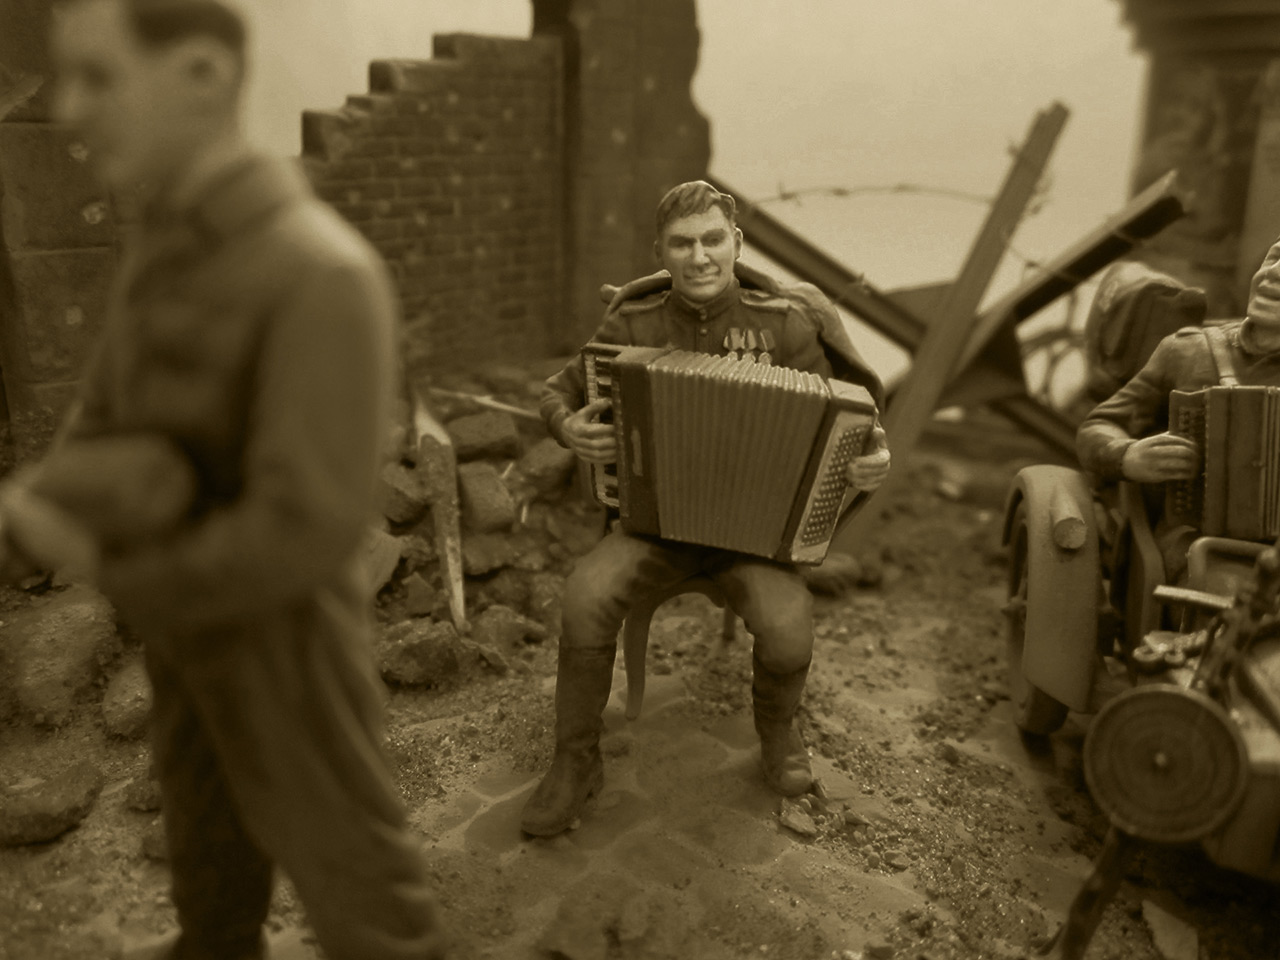 Dioramas and Vignettes: Bringing Victory as closer as we can, photo #35